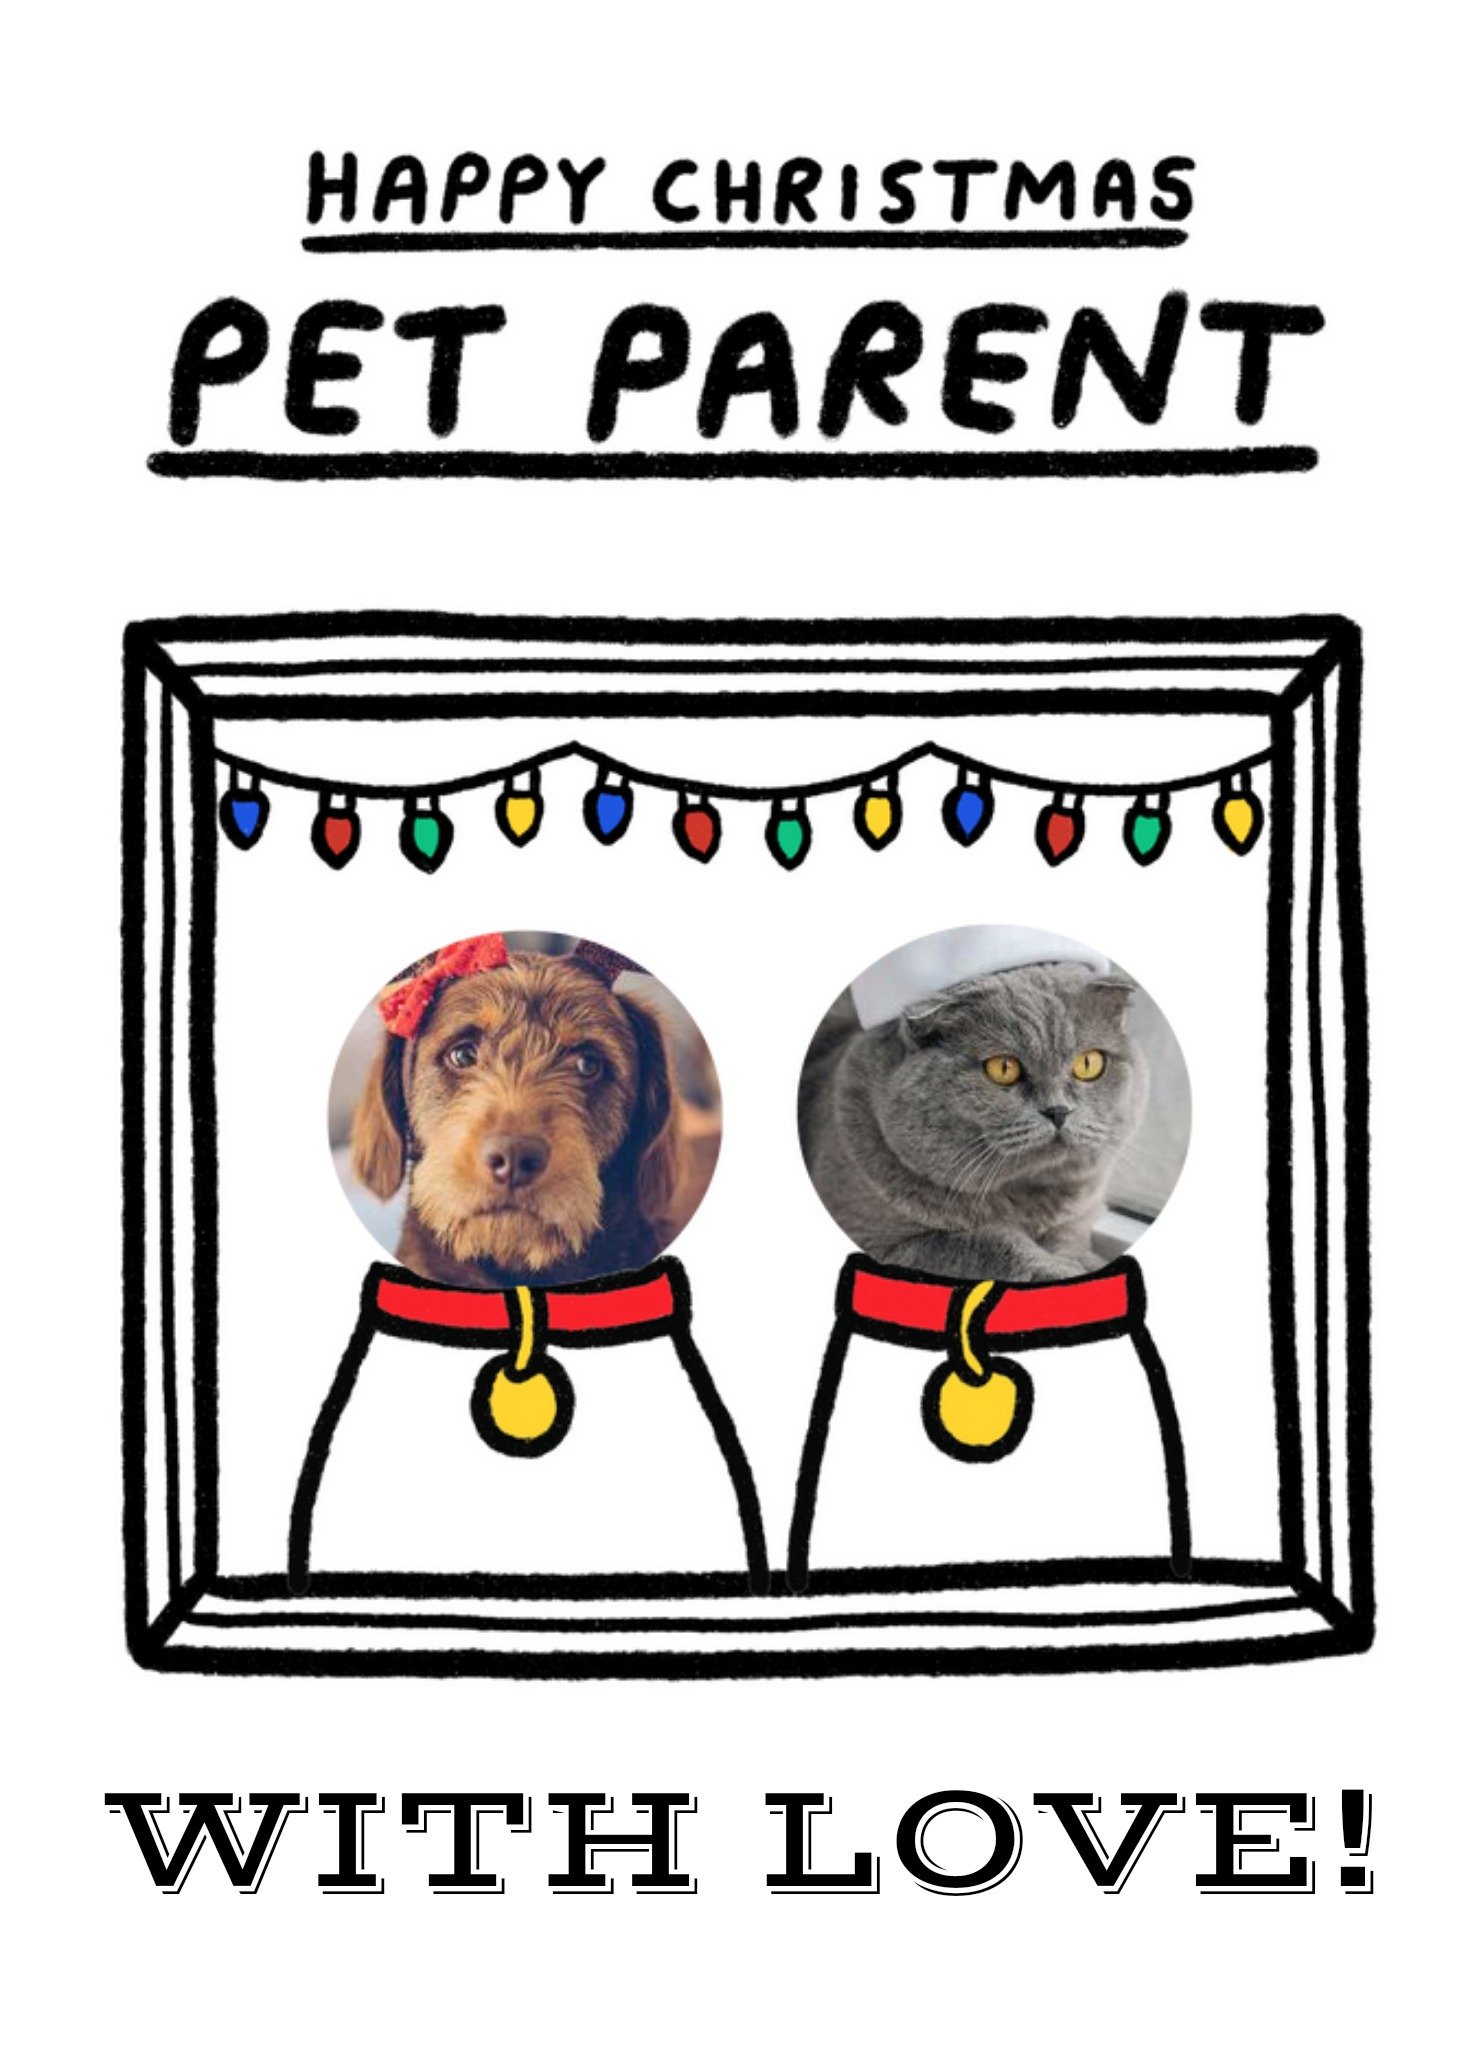 Moonpig Illustration Of Pets In A Picture Frame Pet Parent Photo Upload Christmas Card, Large